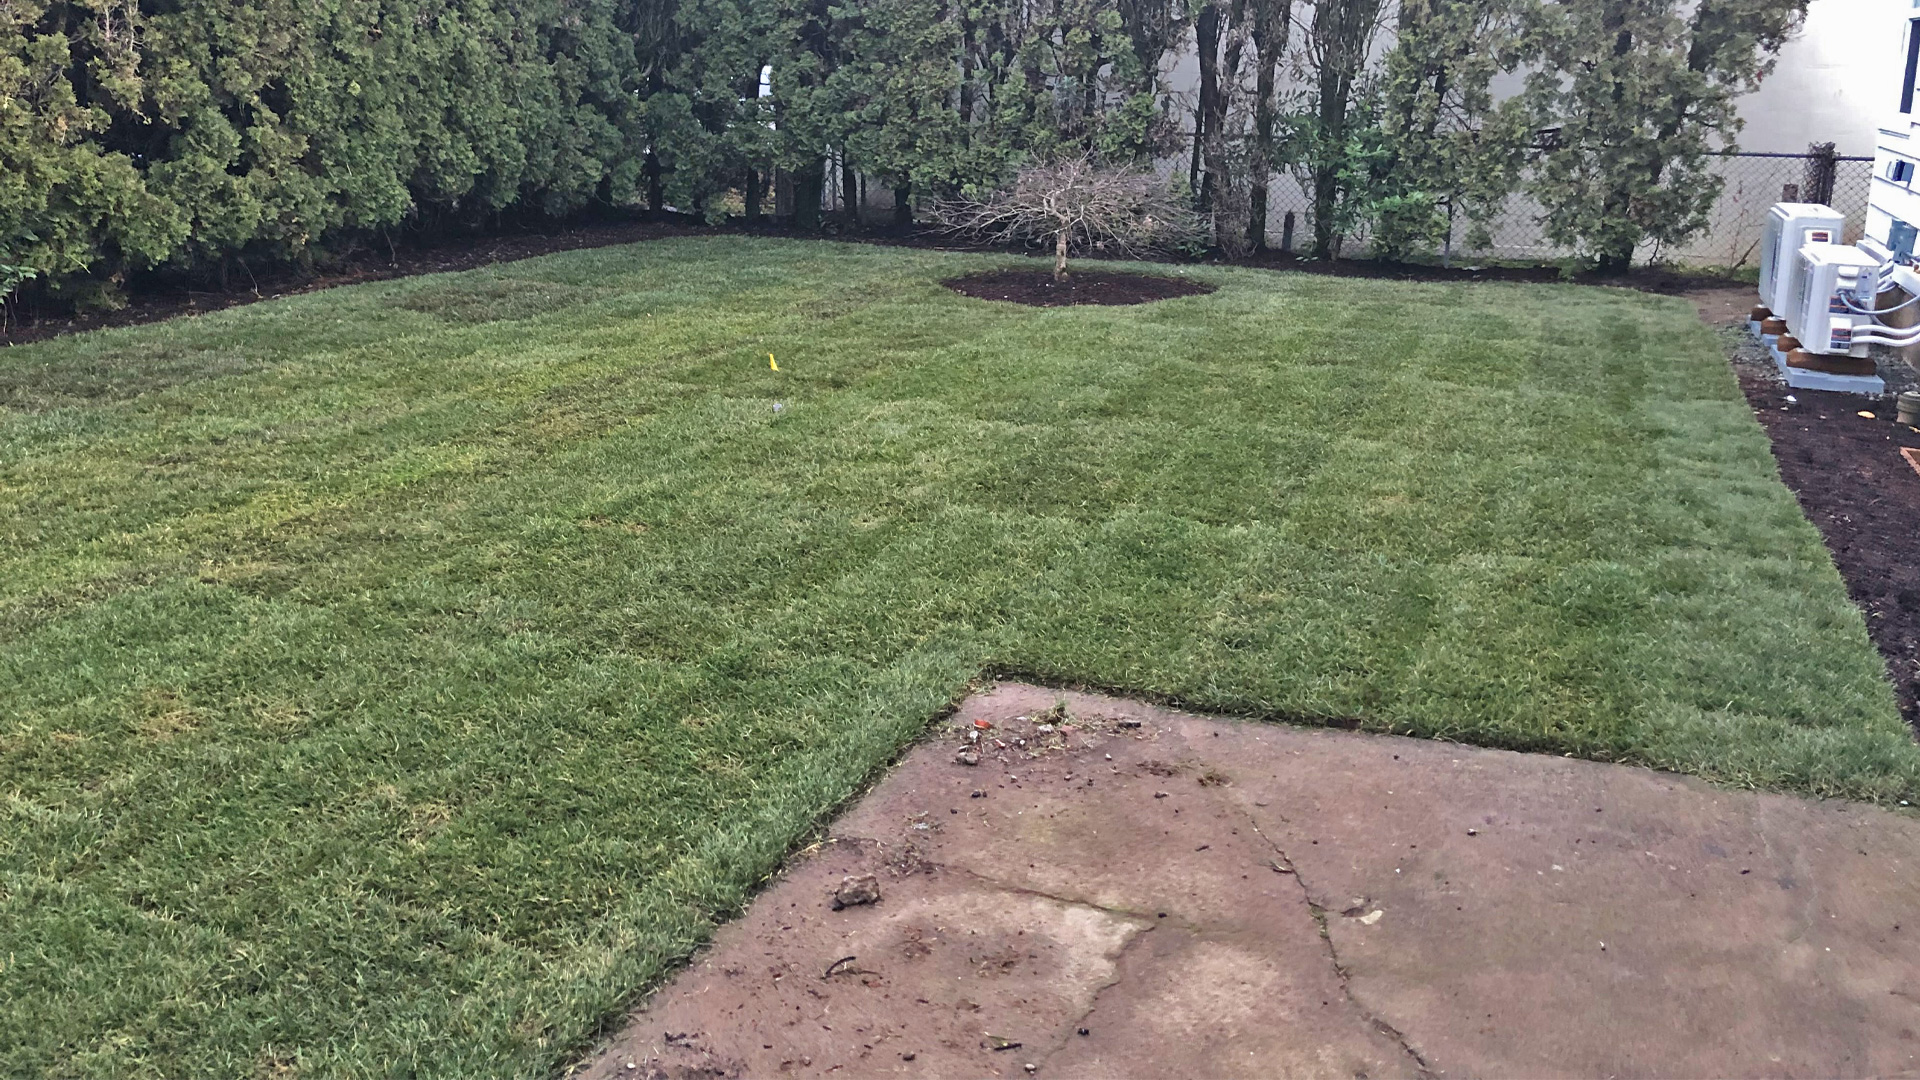 Sod installation at a home property in Tigard, OR.